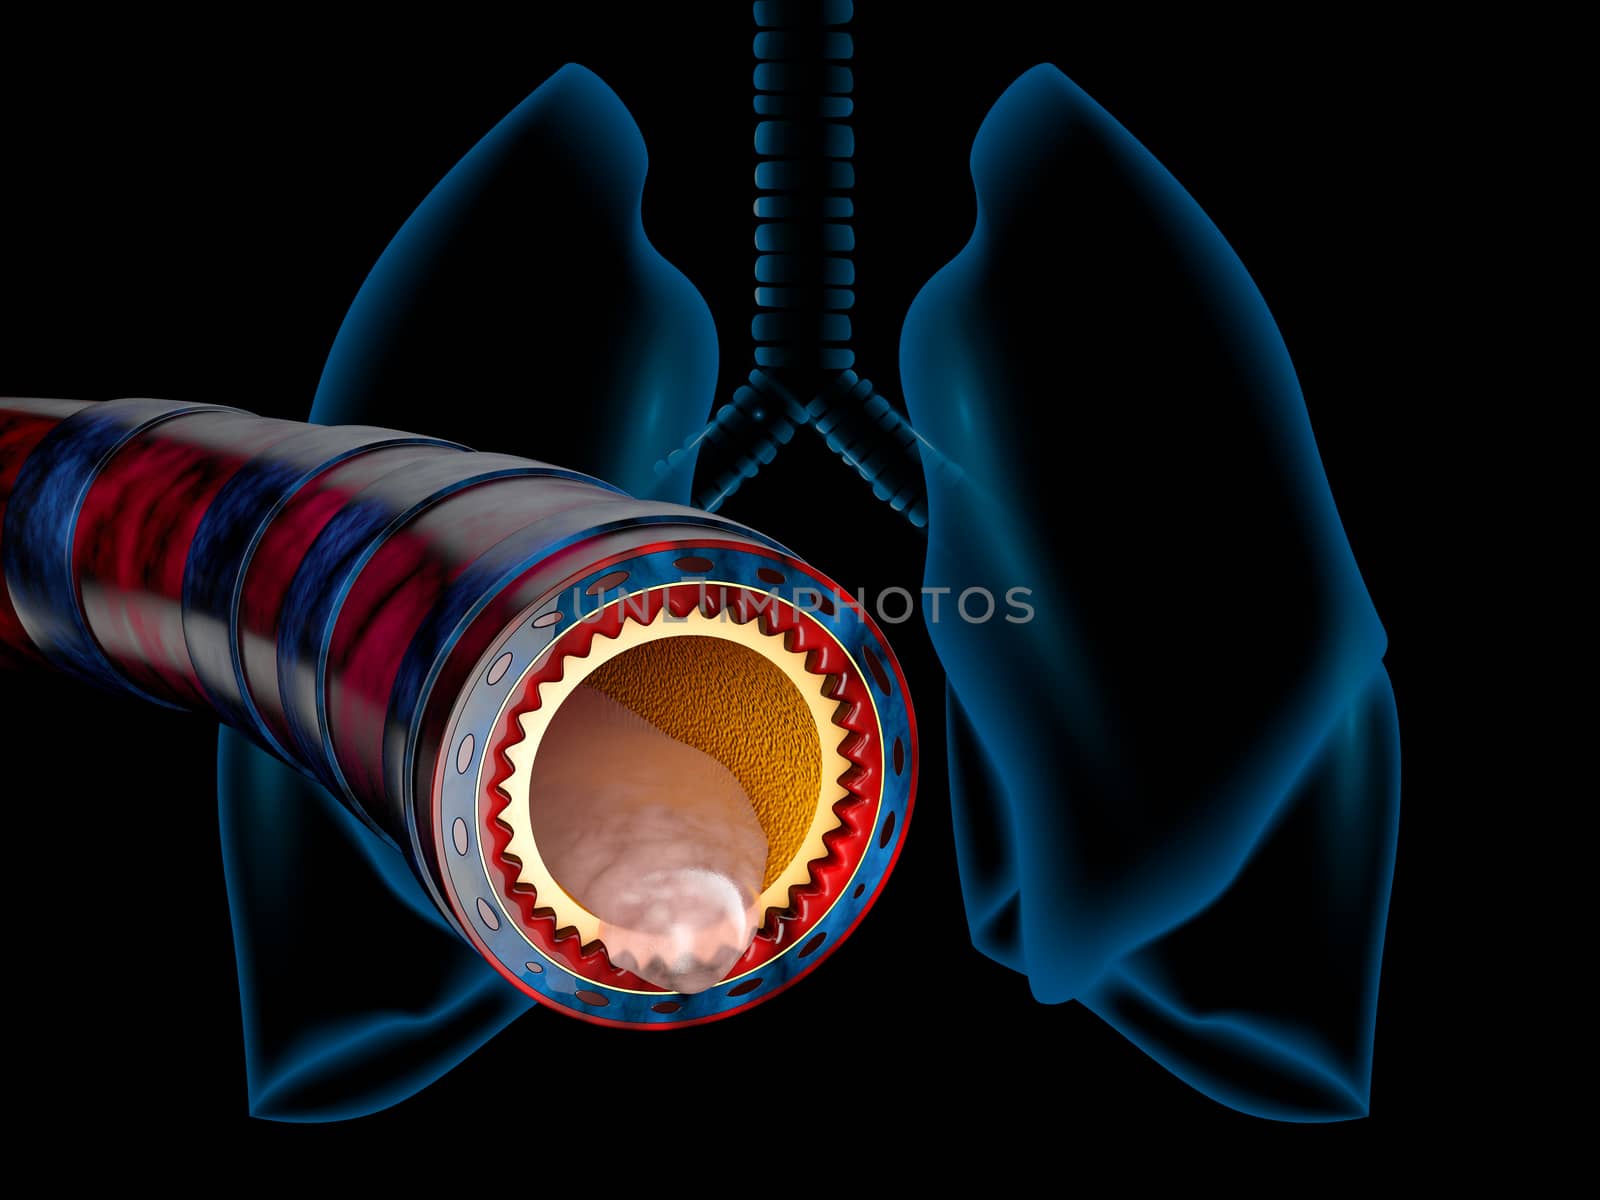 Bronchitis anatomy, mucus secreted as a chest cold as a 3D illustration by tussik